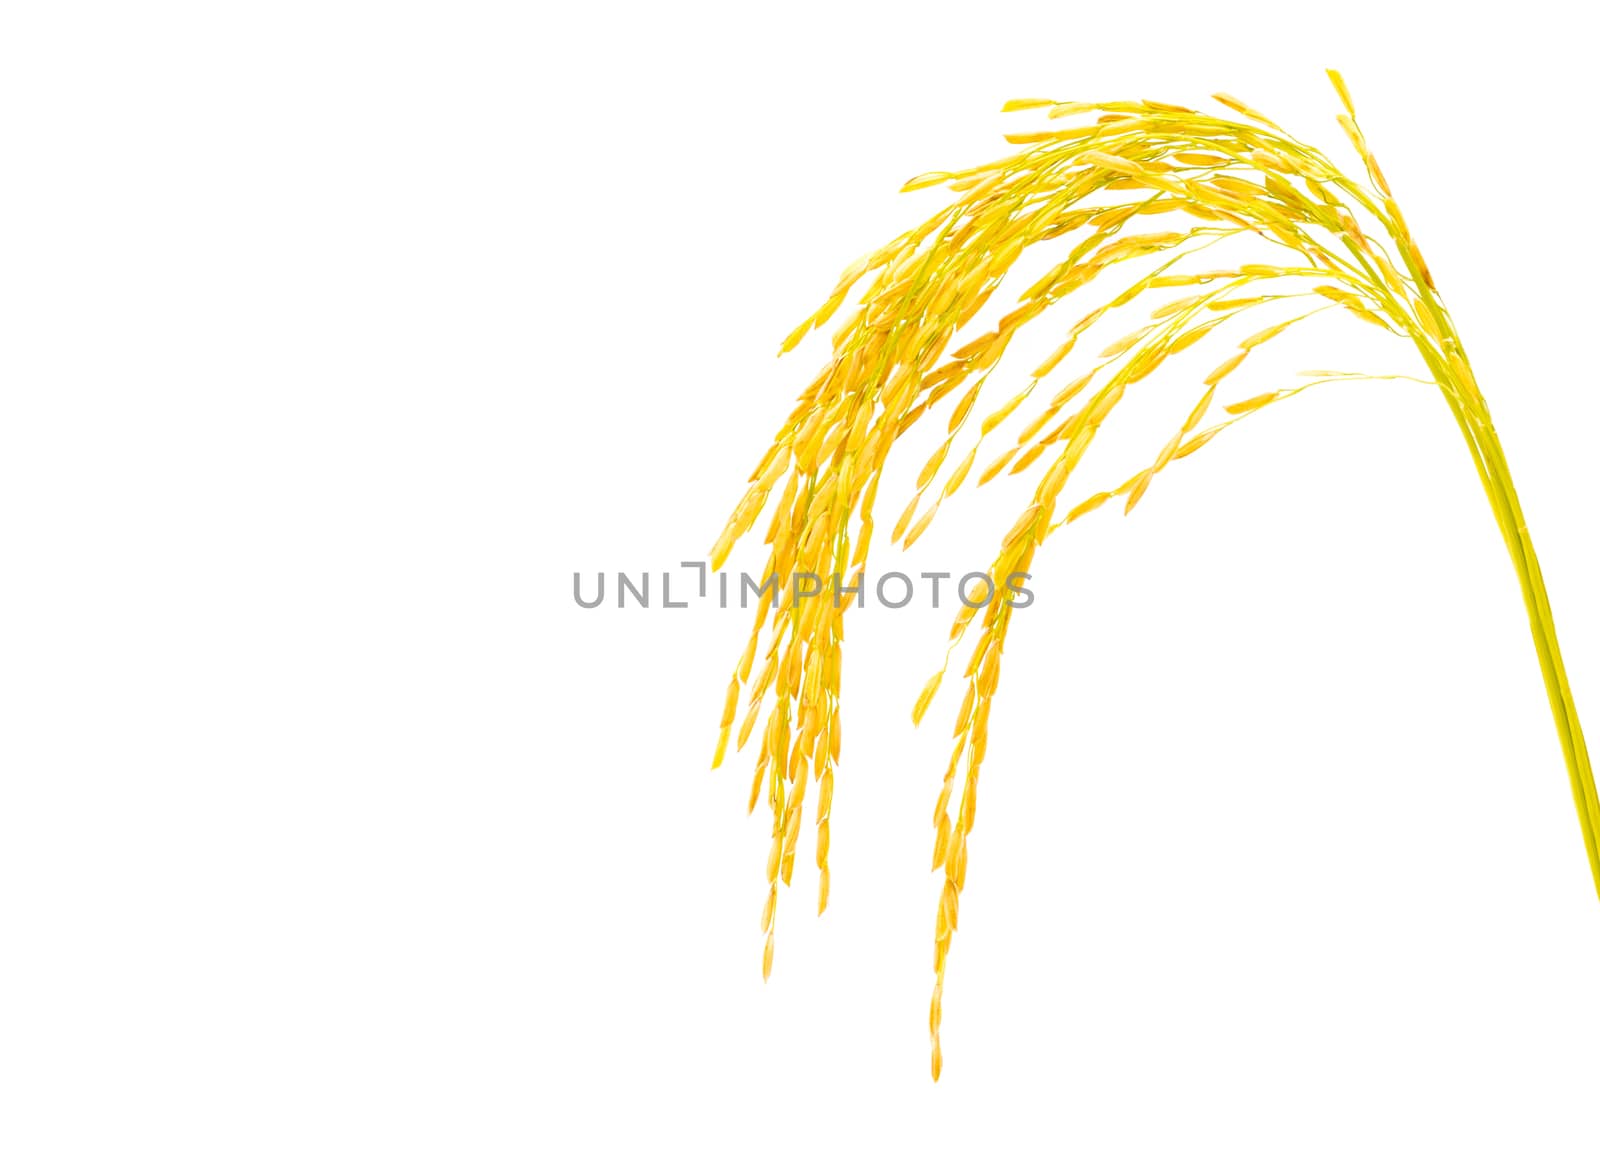 Rice of paddy Golden yellow on a white background